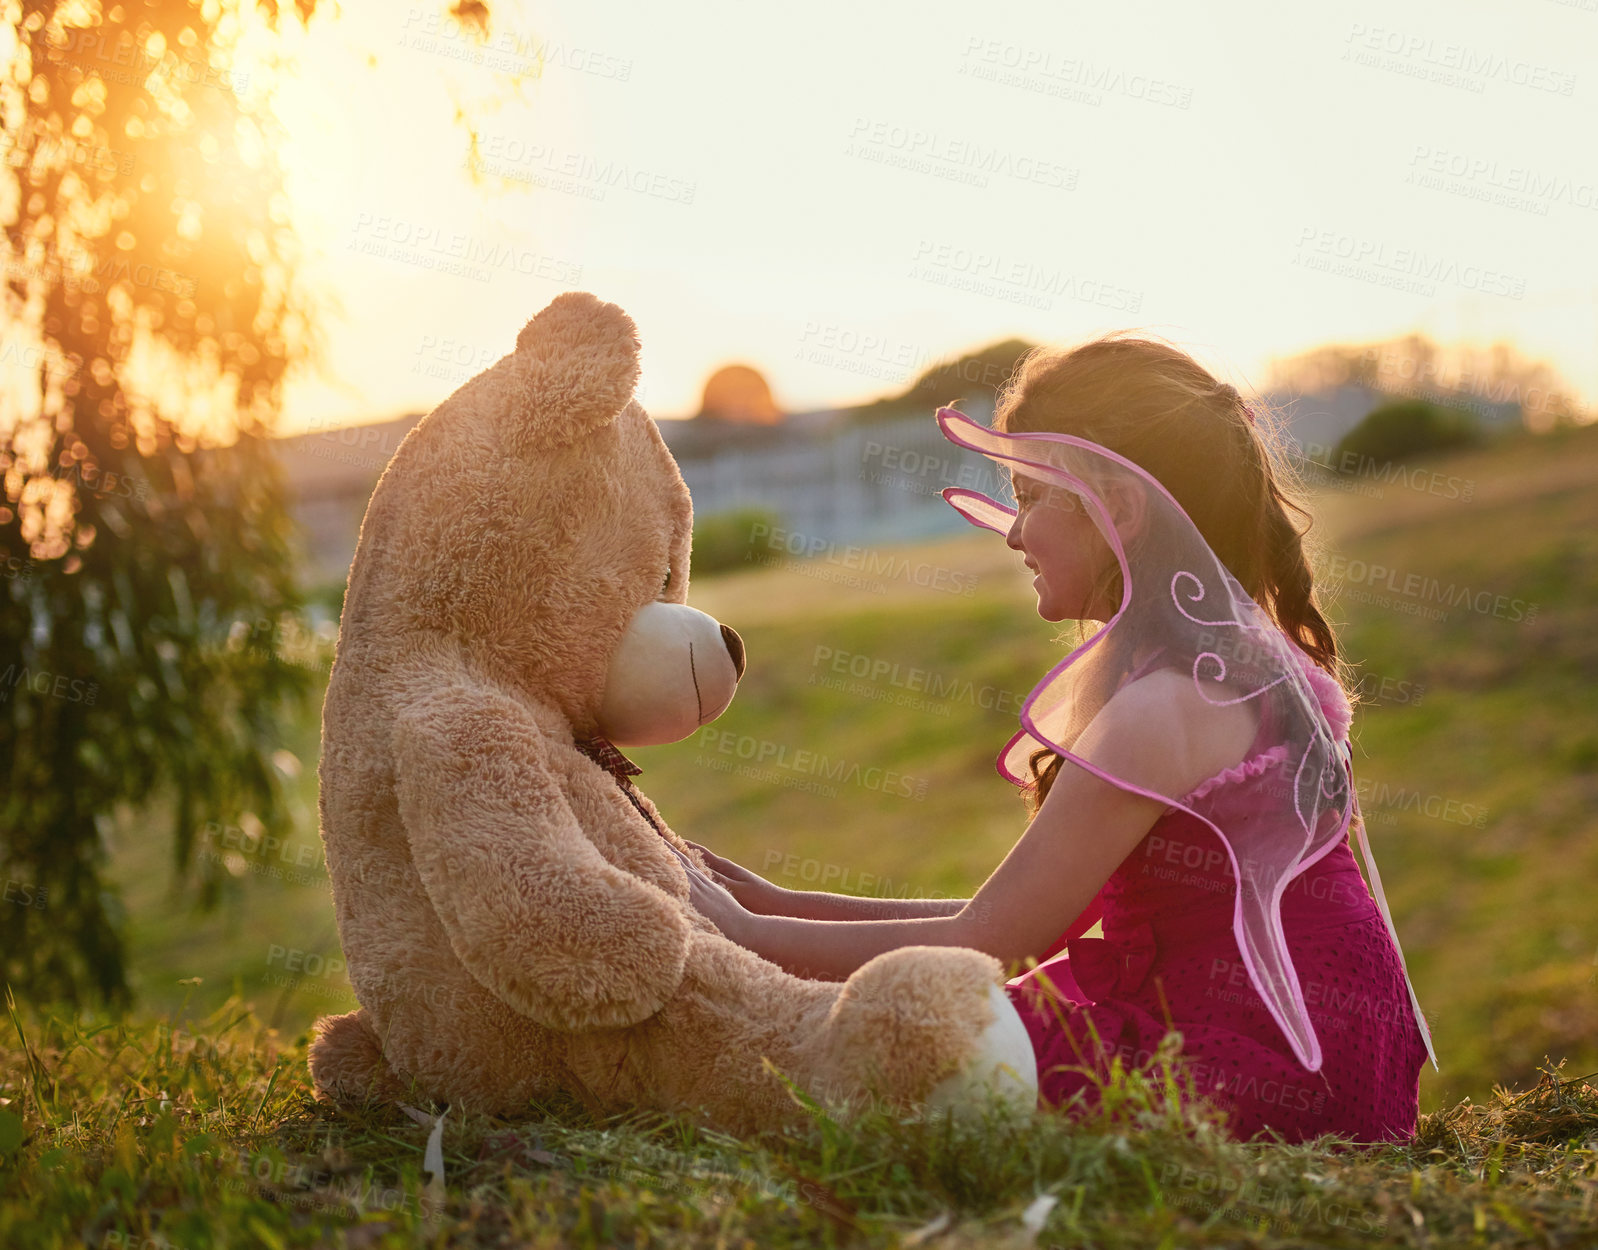 Buy stock photo Shot of a cute little girl playing with a huge teddybear in the park